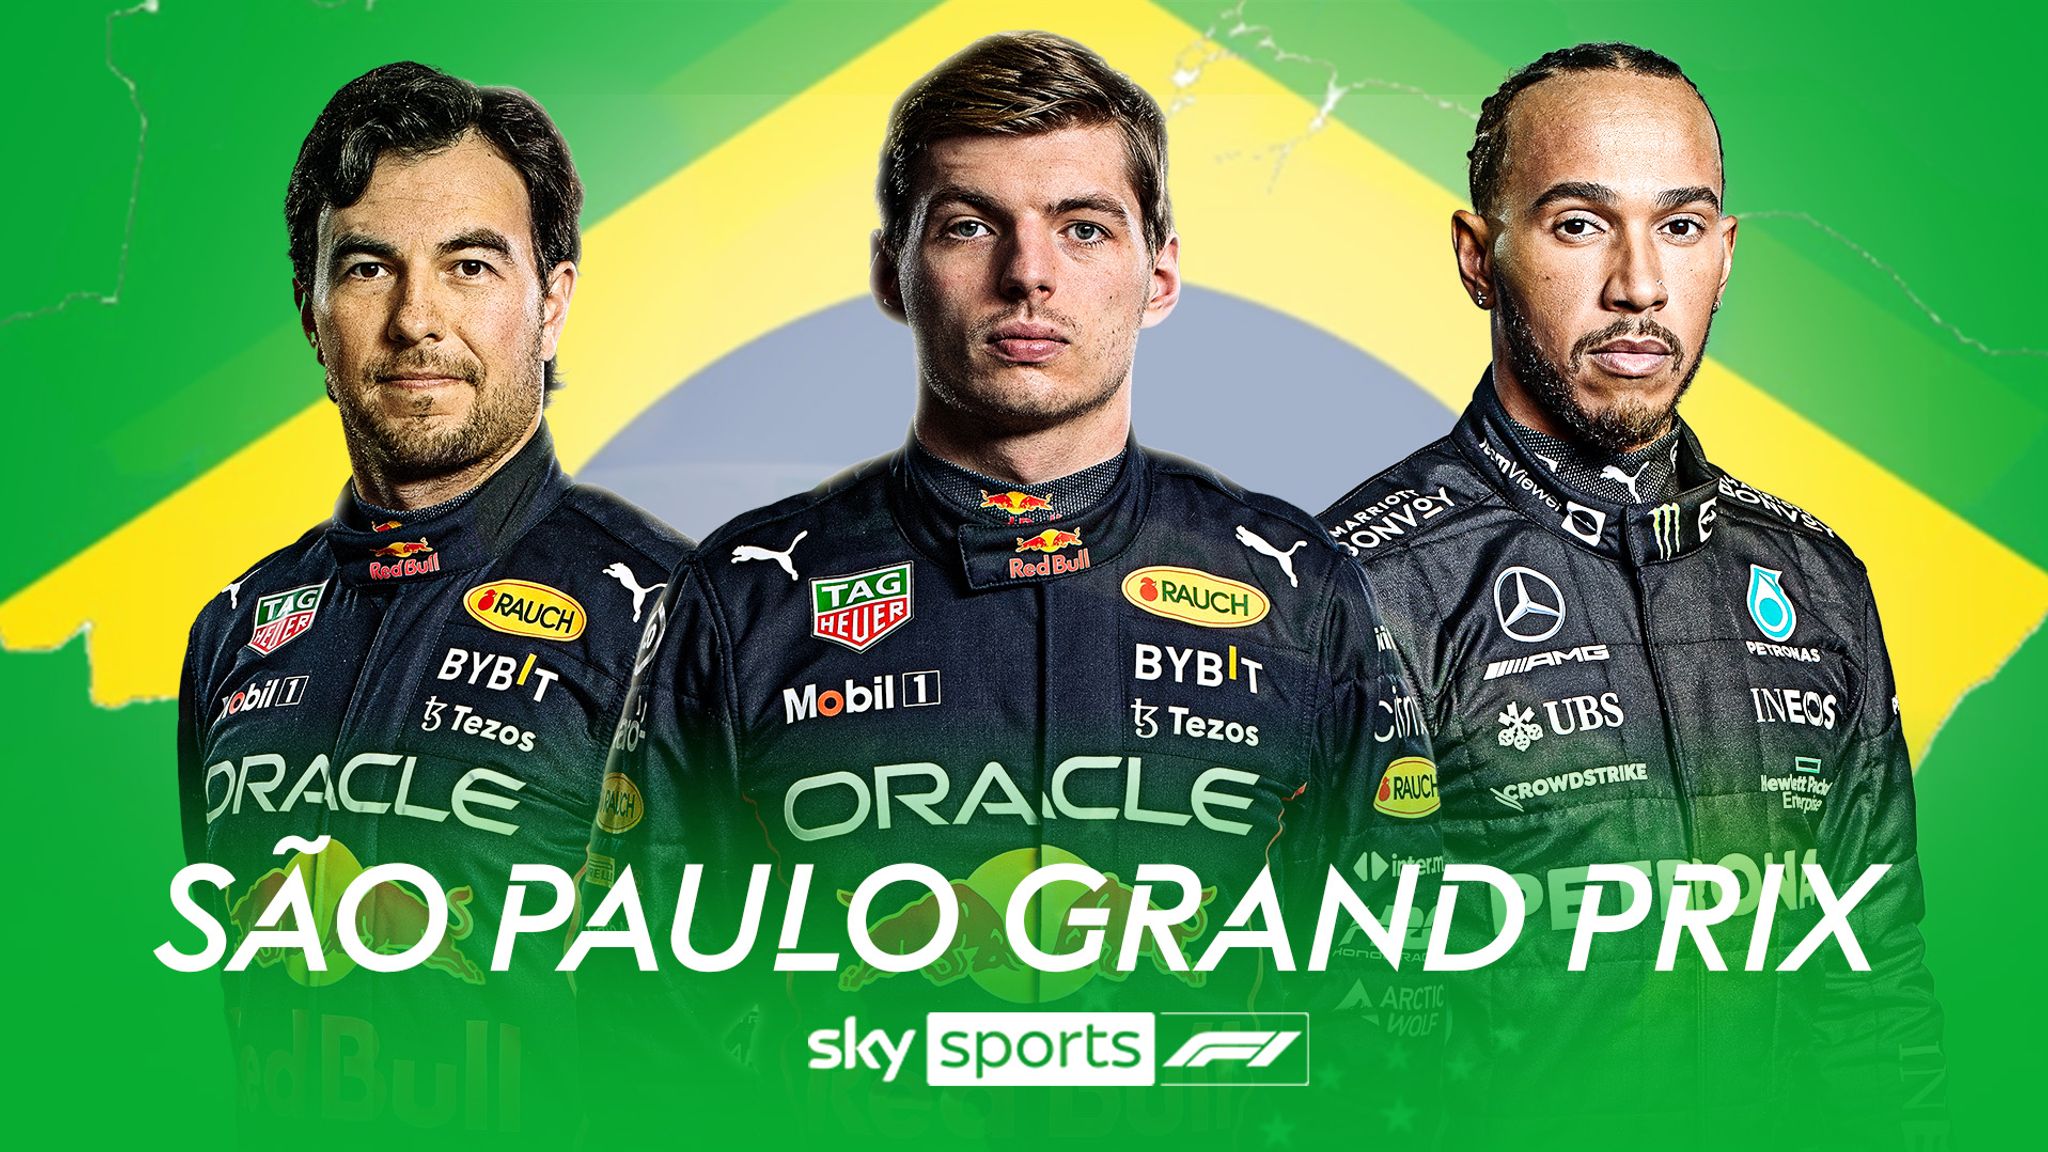 F1 Brazilian GP sprint qualifying and race - Start time, how to